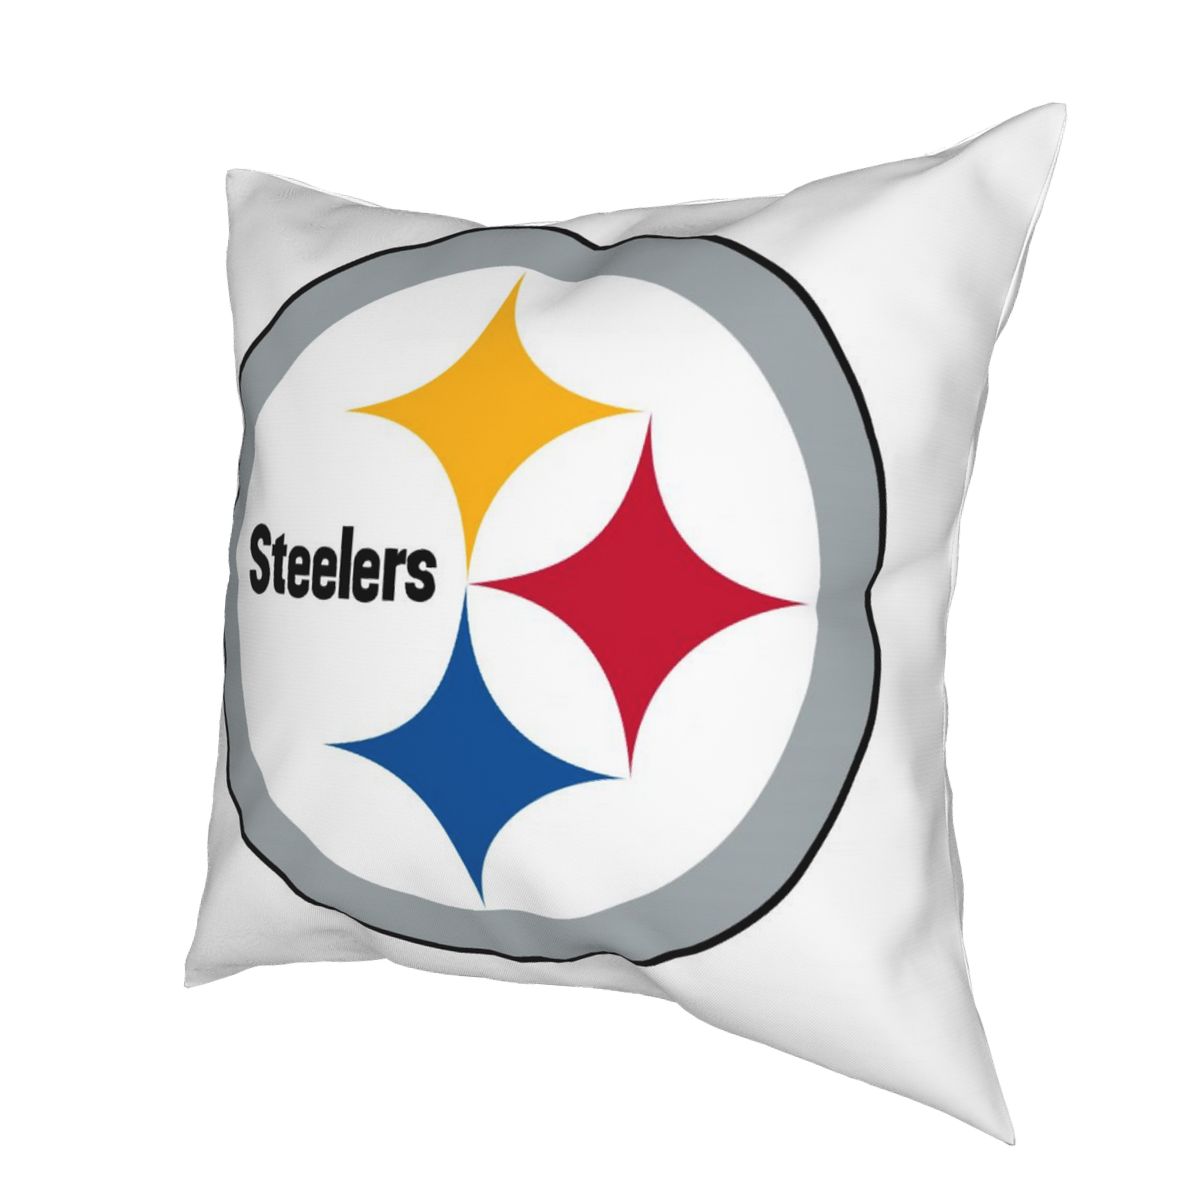 Custom Decorative Football Pillow Case Pittsburgh Steelers White Pillowcase Personalized Throw Pillow Covers